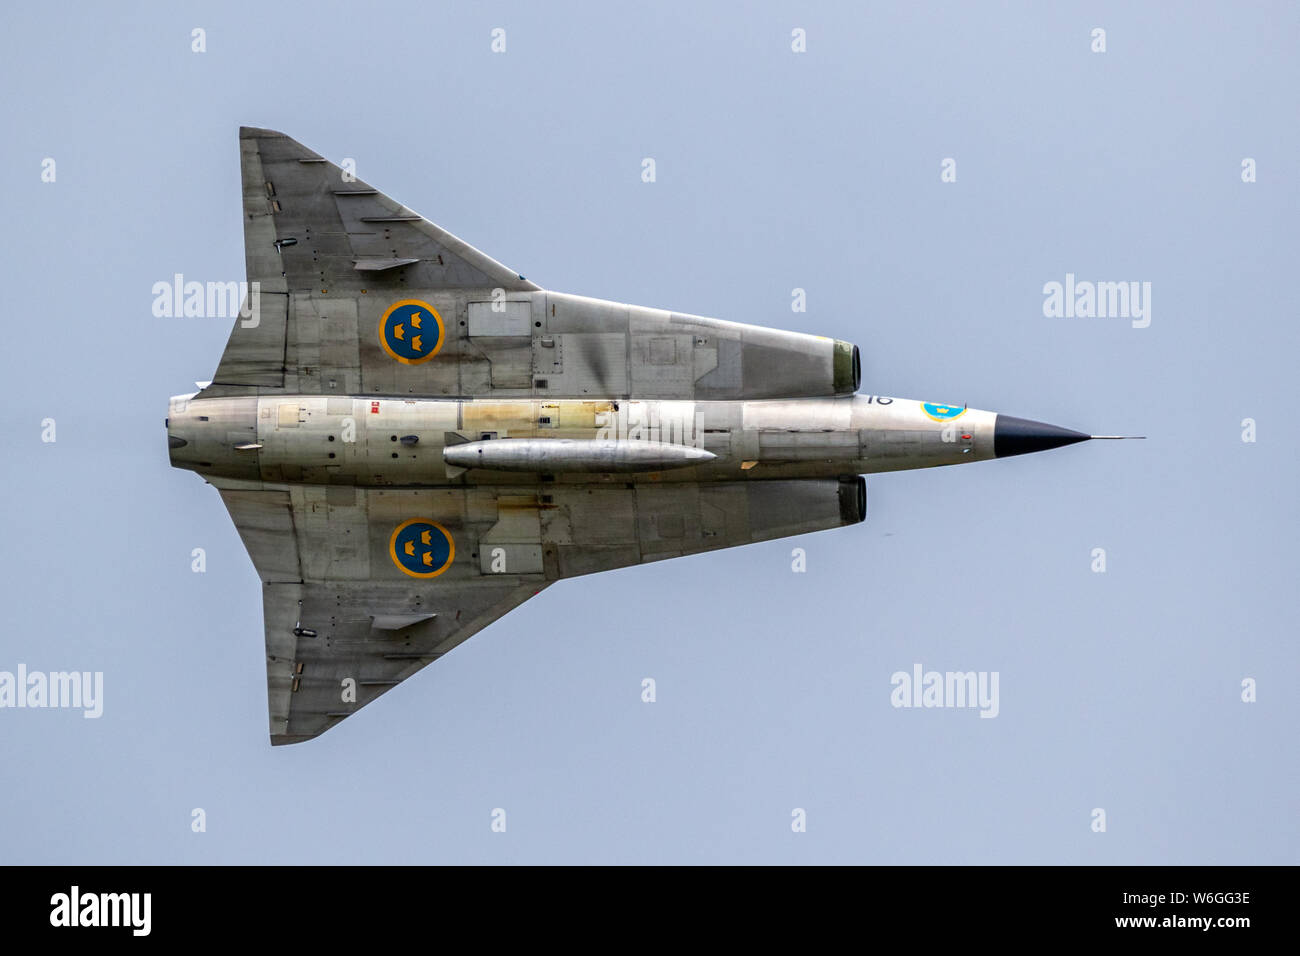 Swedish Air Force High Resolution Stock Photography and Images - Alamy